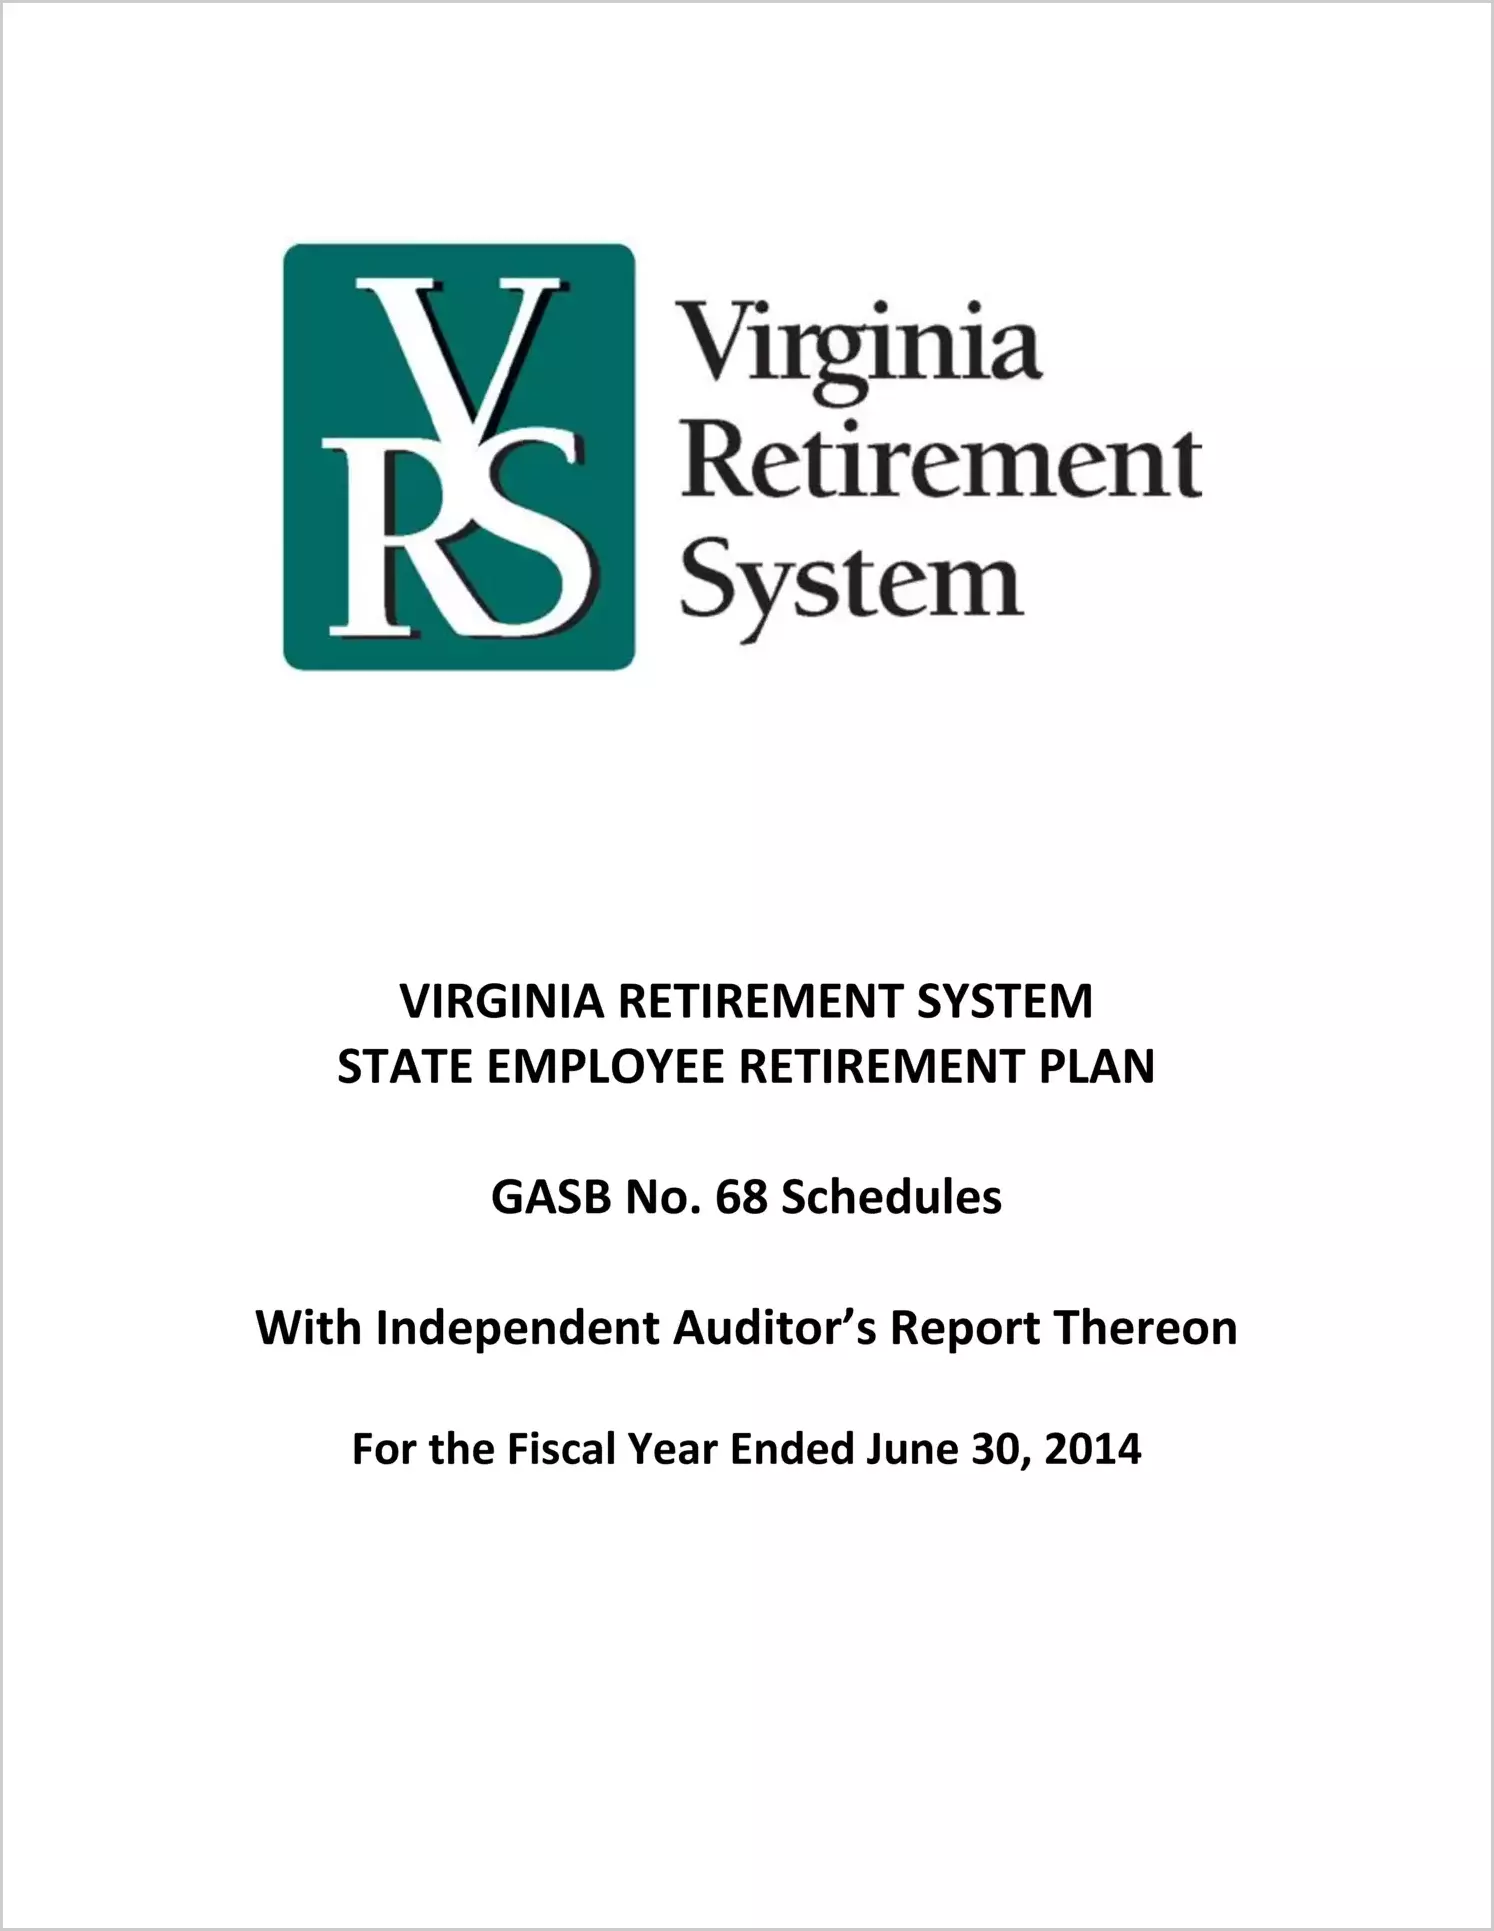 GASB 68 Schedule - State Employee Retirement Plan for the fiscal year ended June 30, 2014